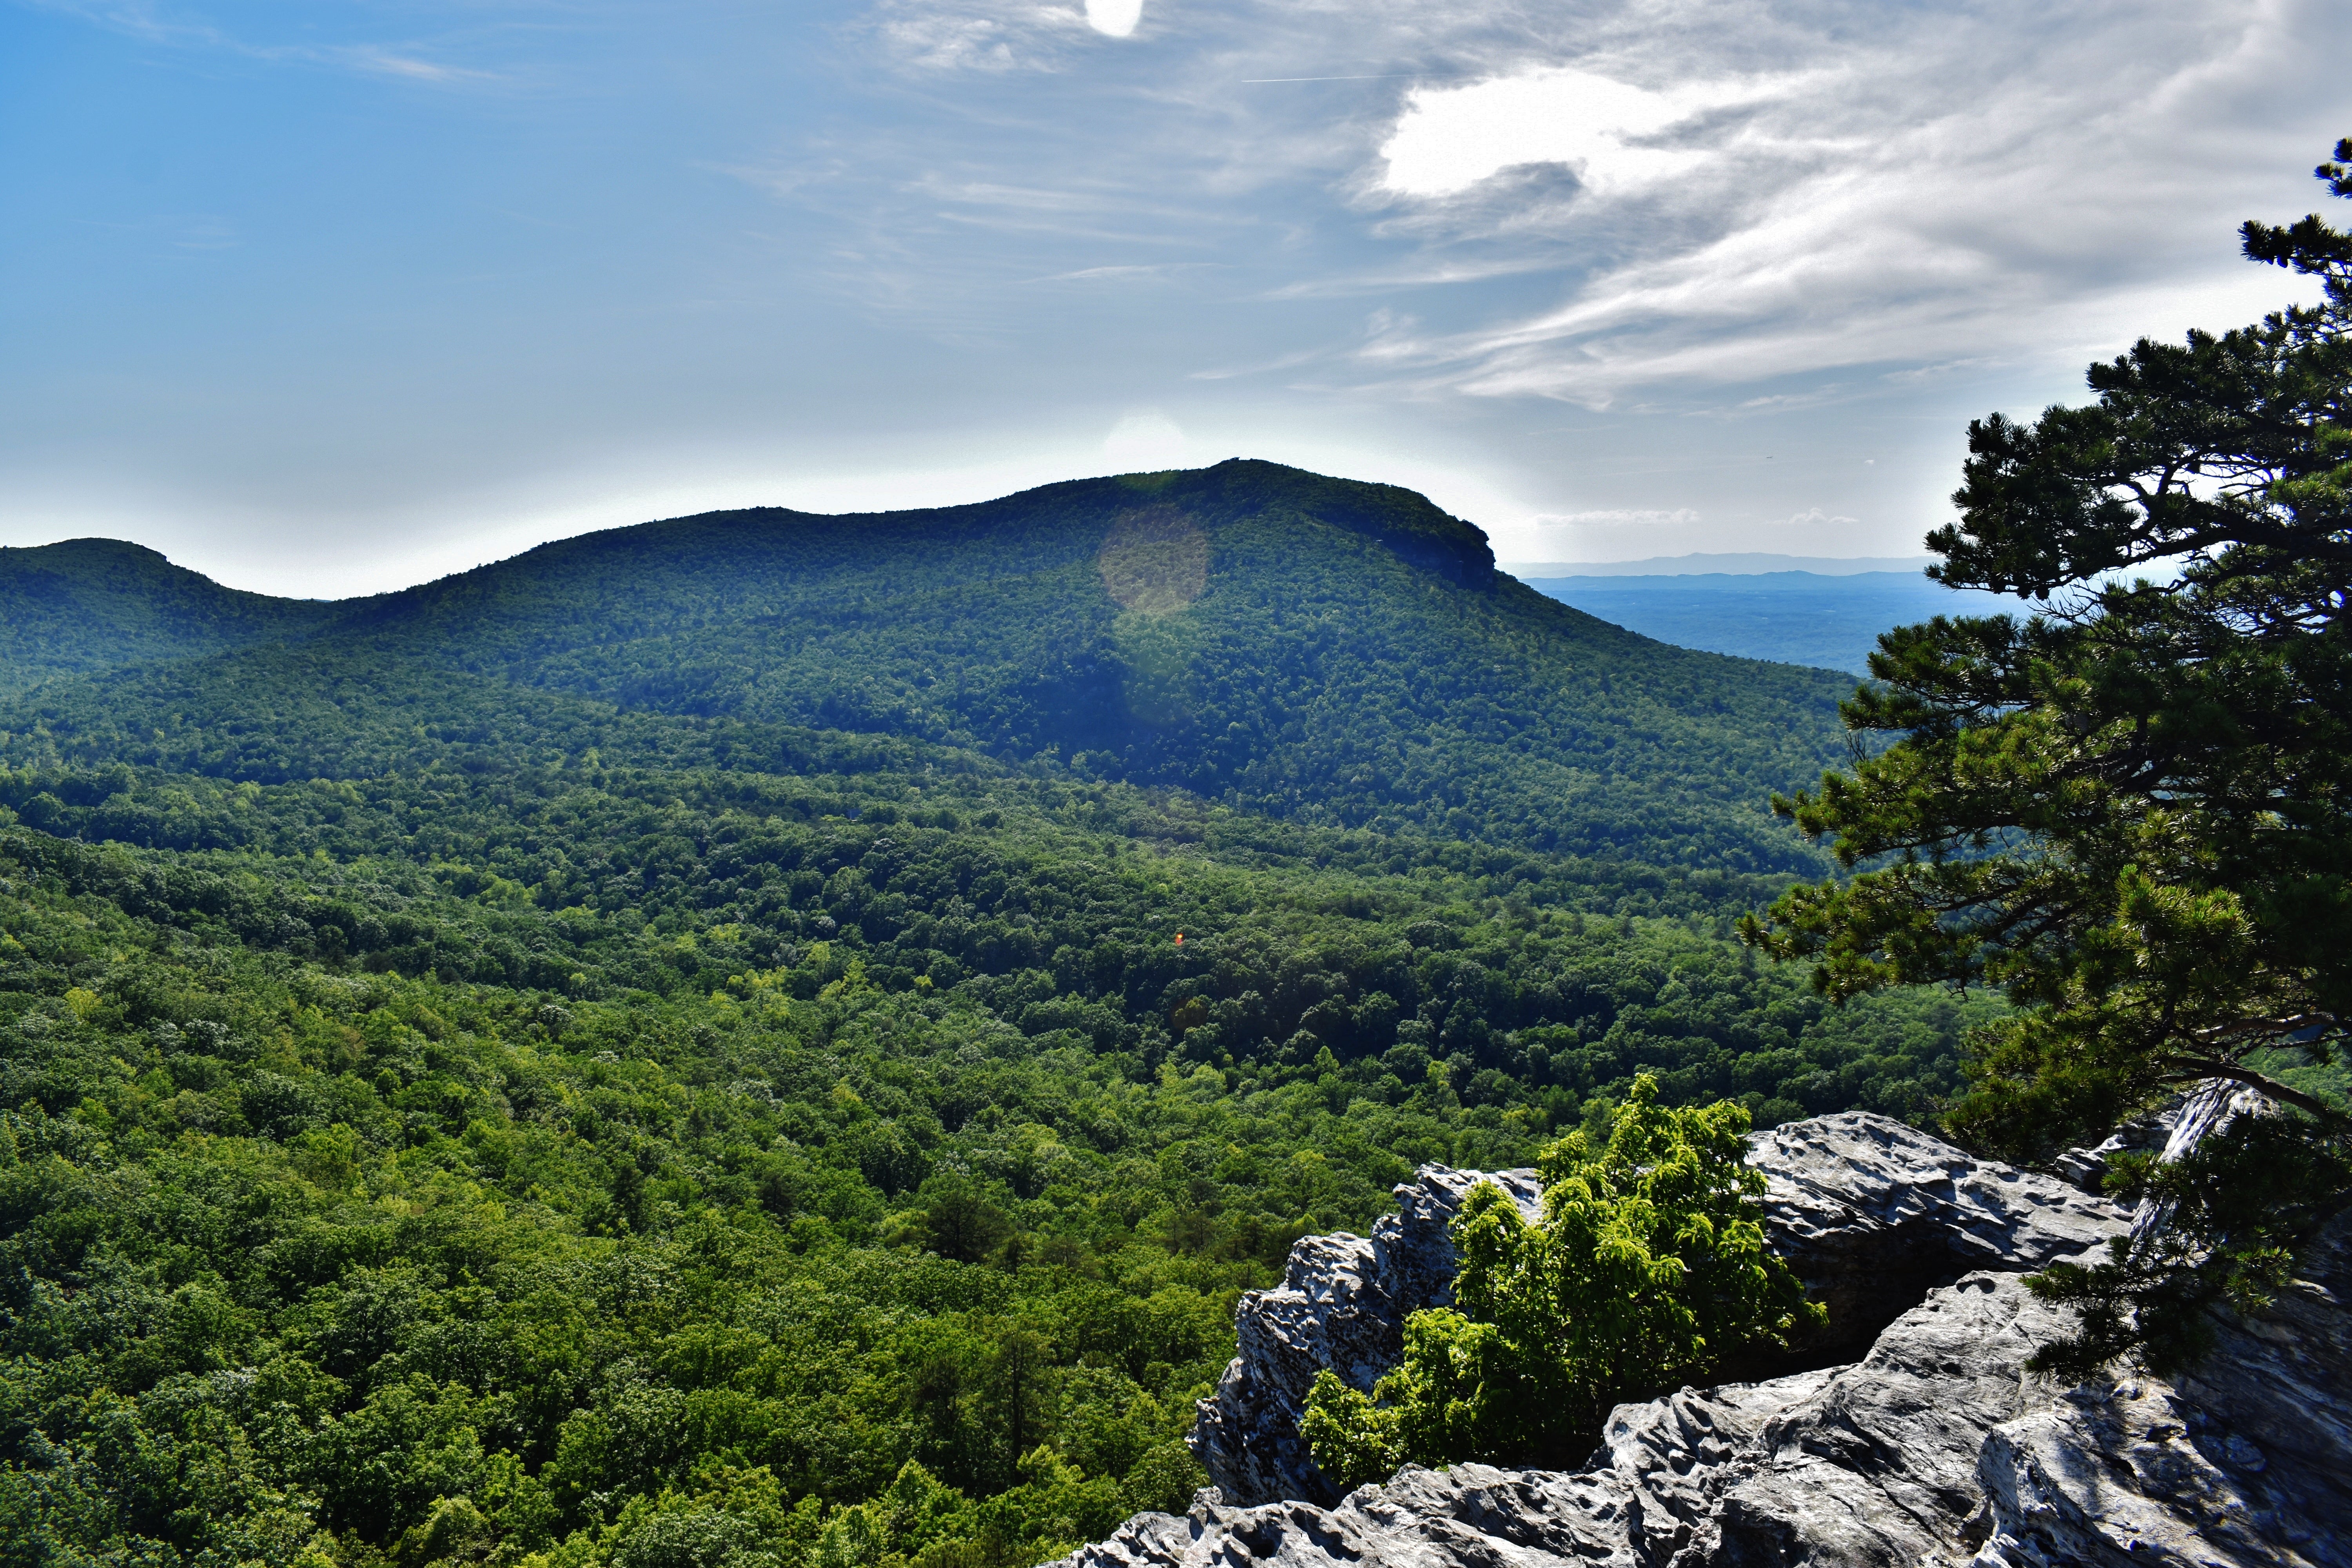 Here is another view from the hanging rock